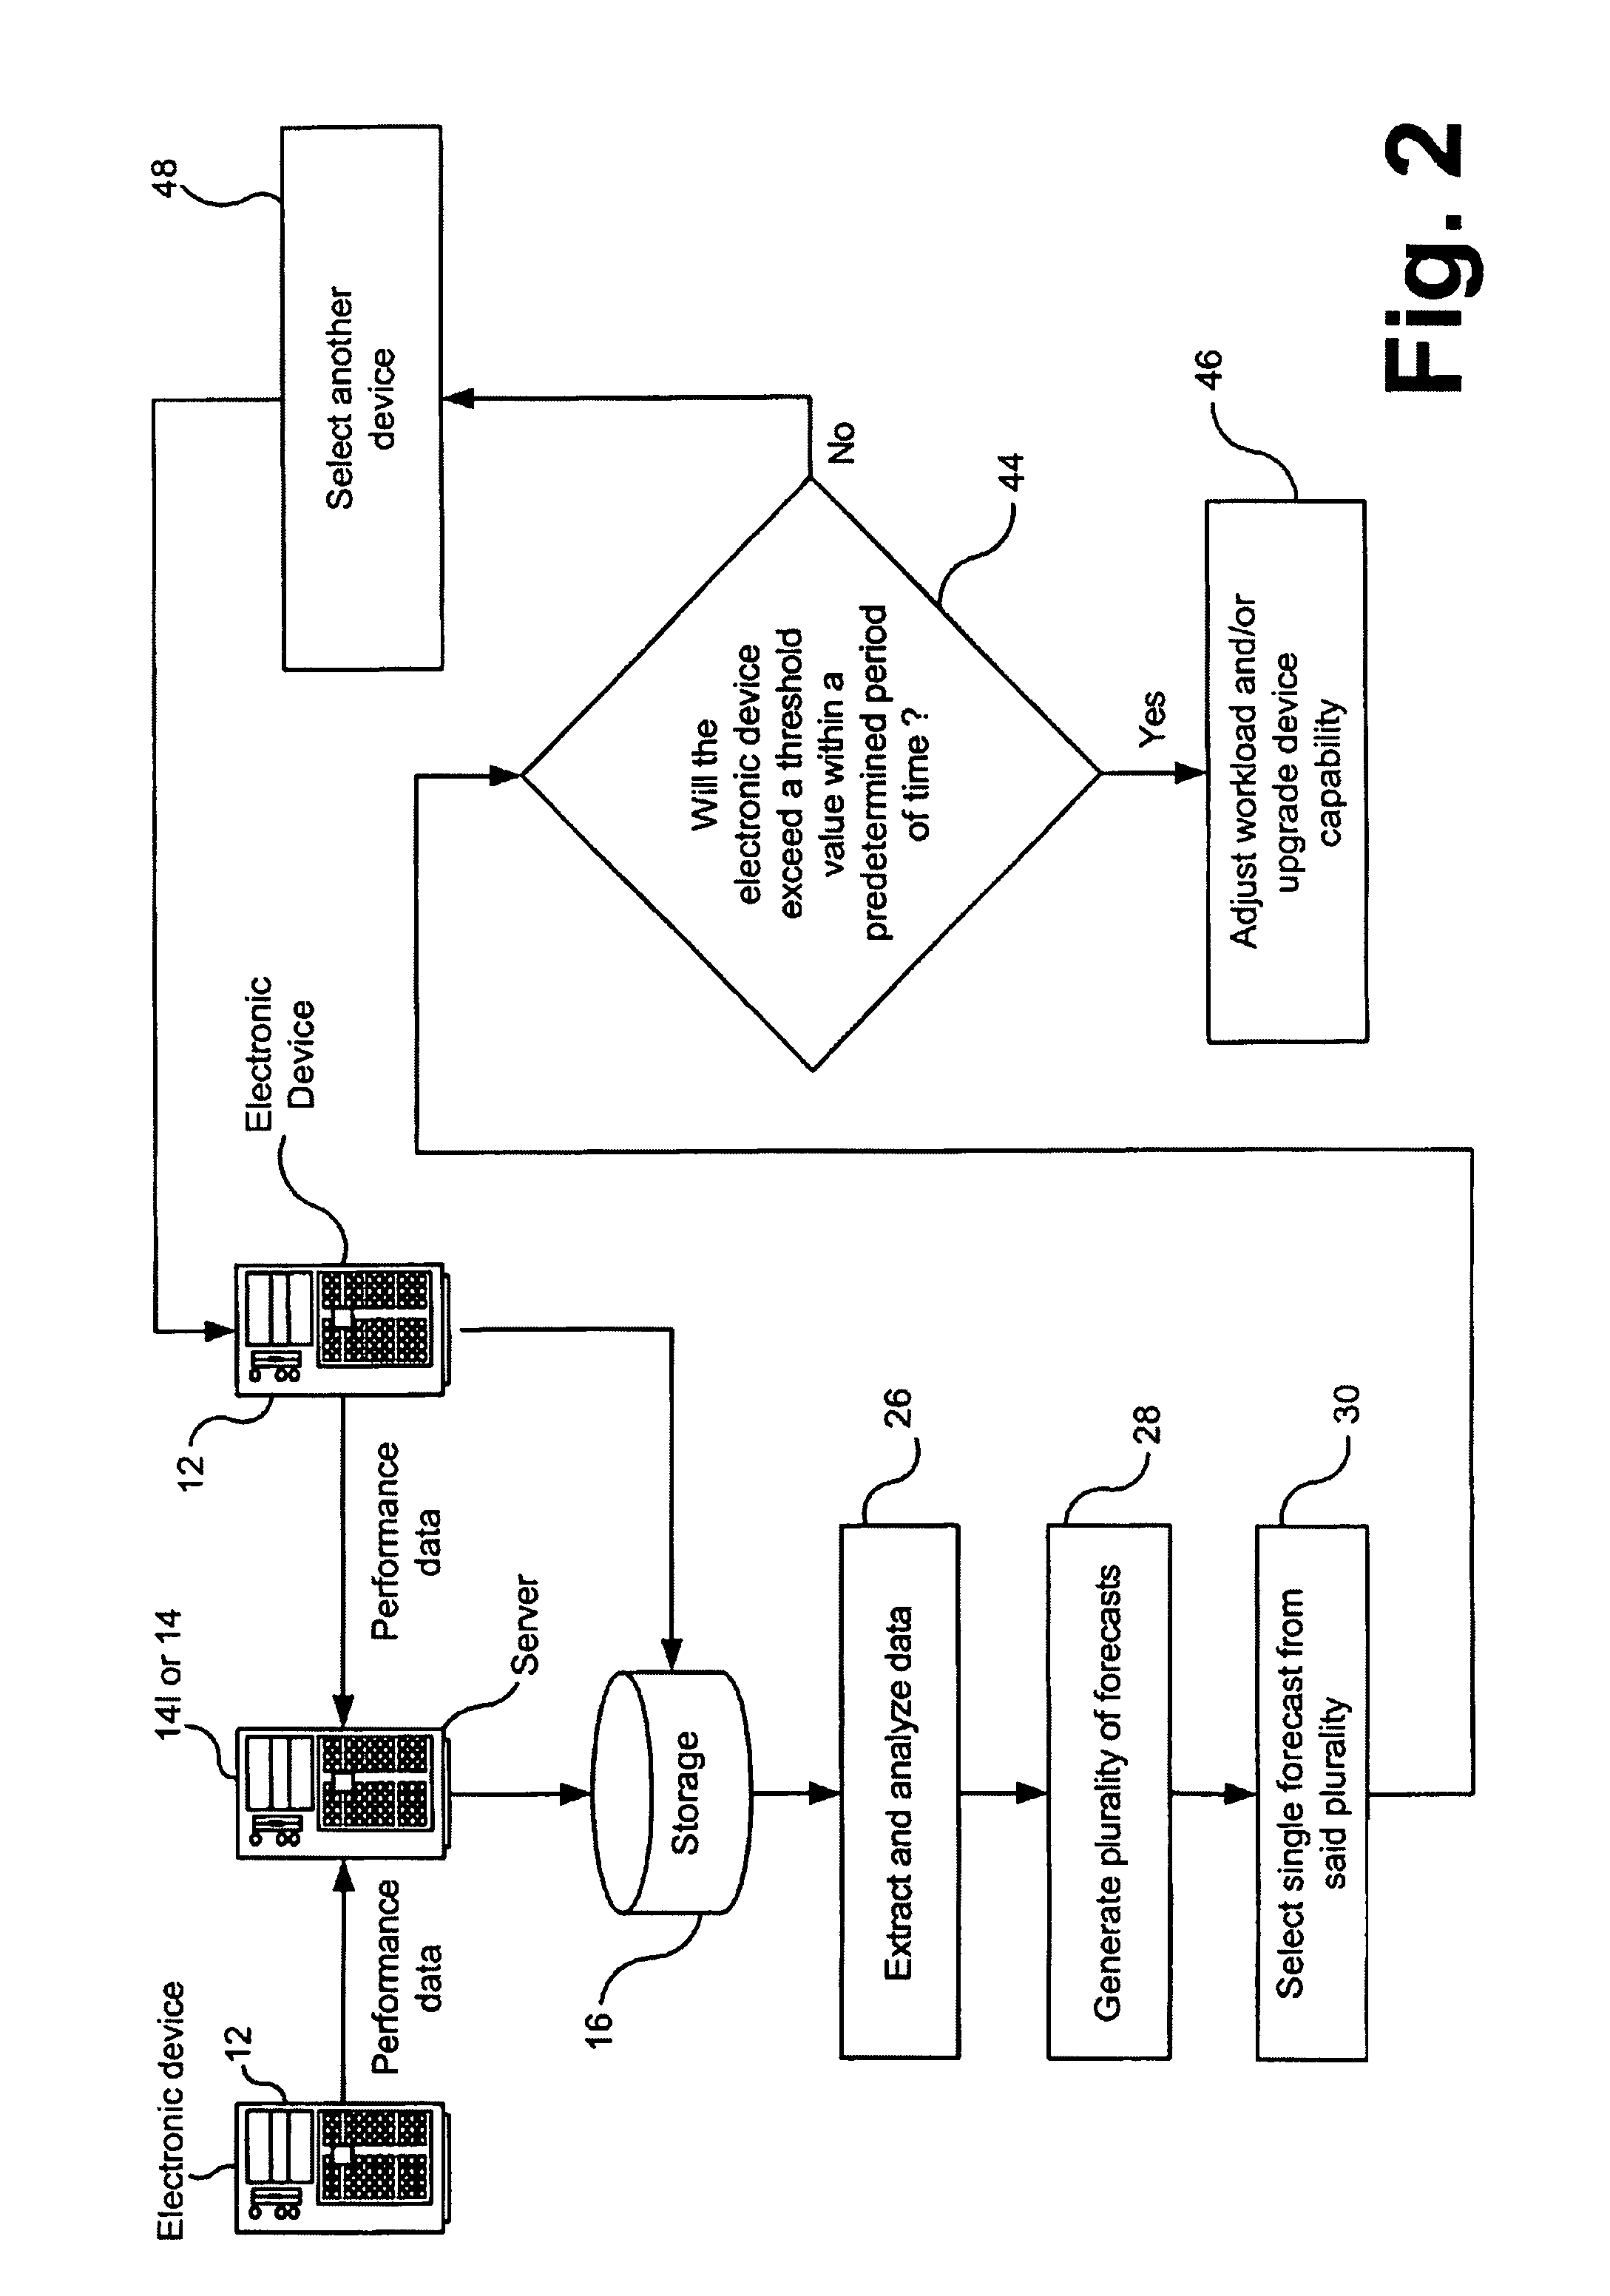 Managing the performance of an electronic device